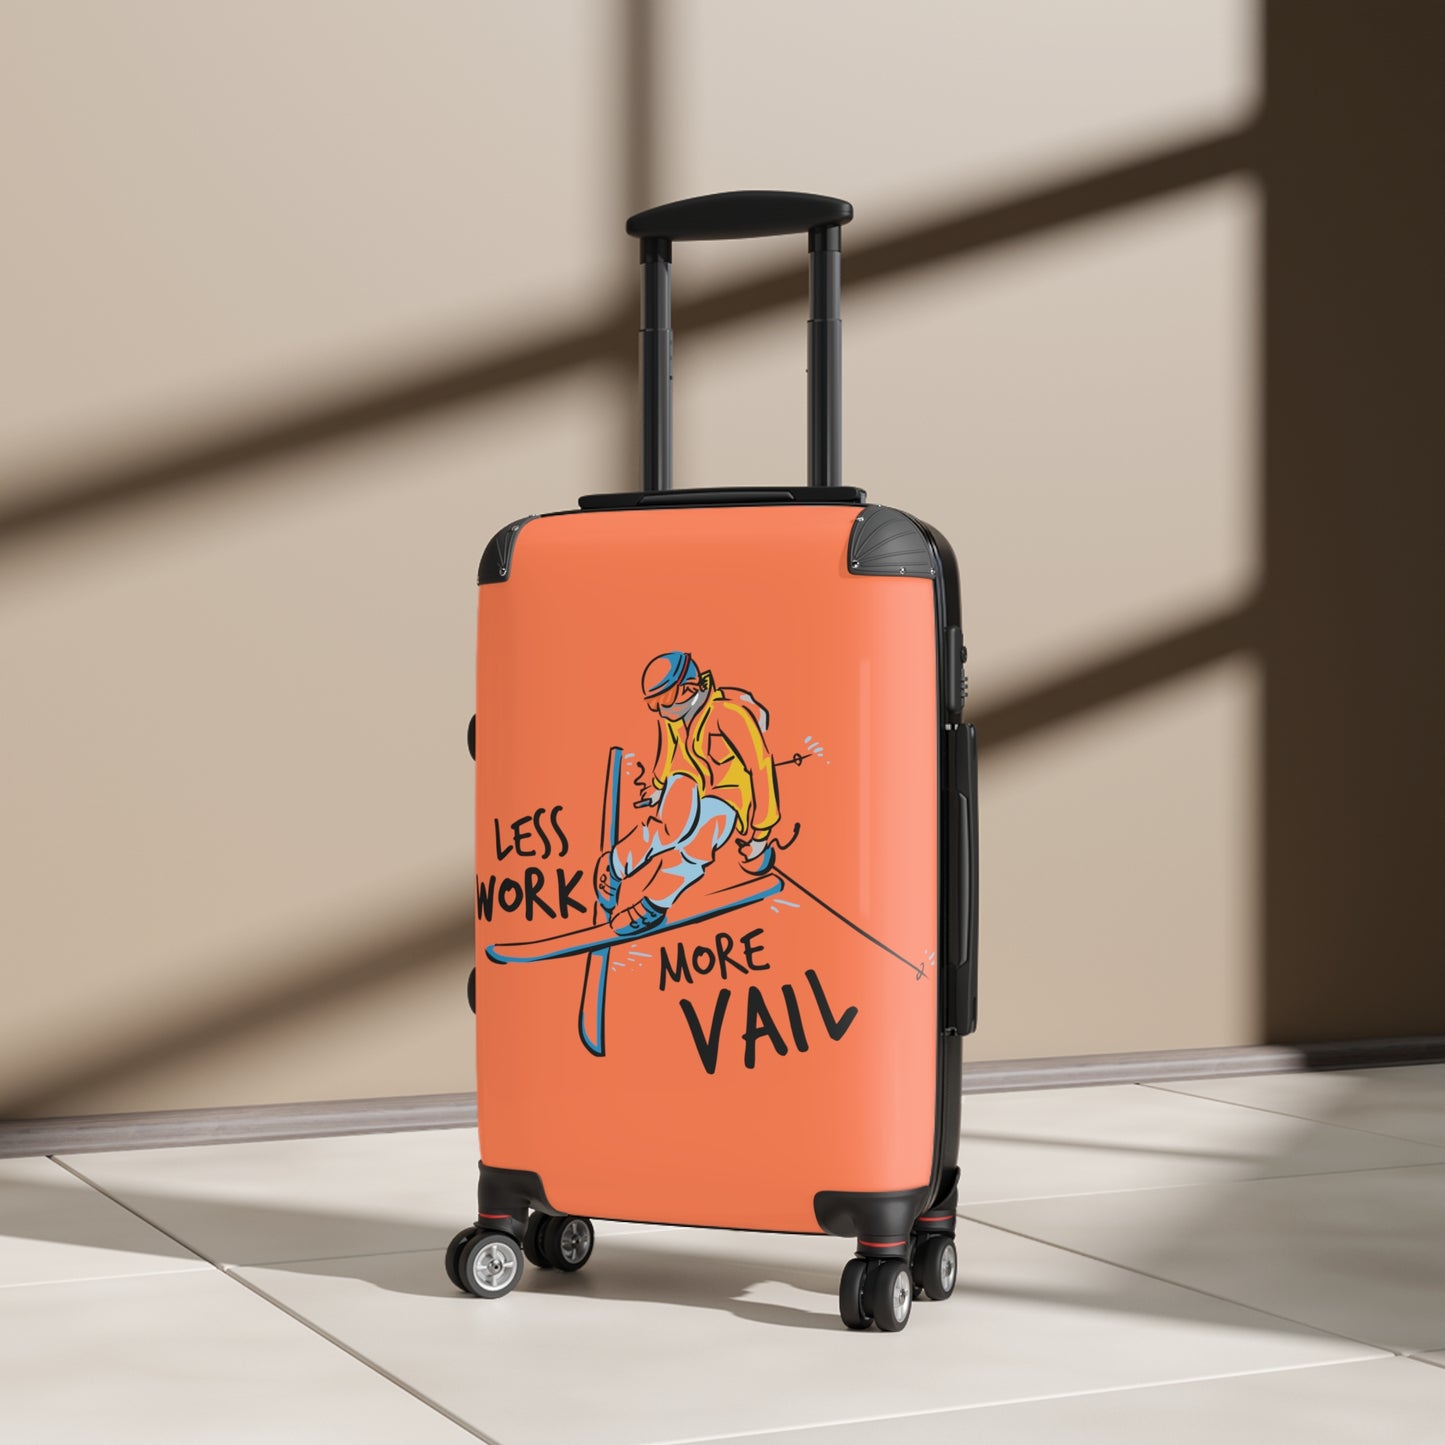 Less Work More Vail Custom Luggage